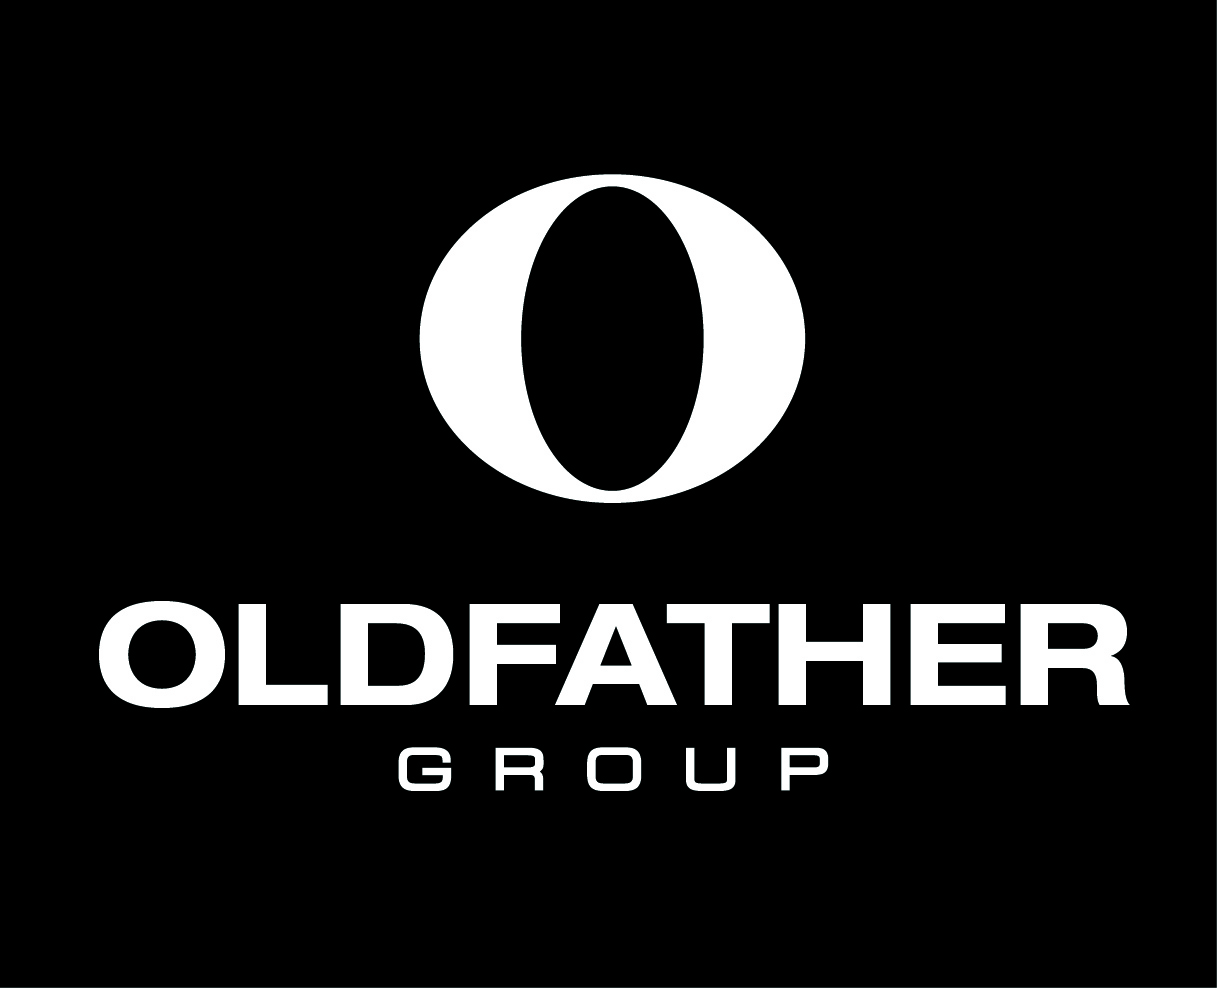 Oldfather Group Black and White Logo